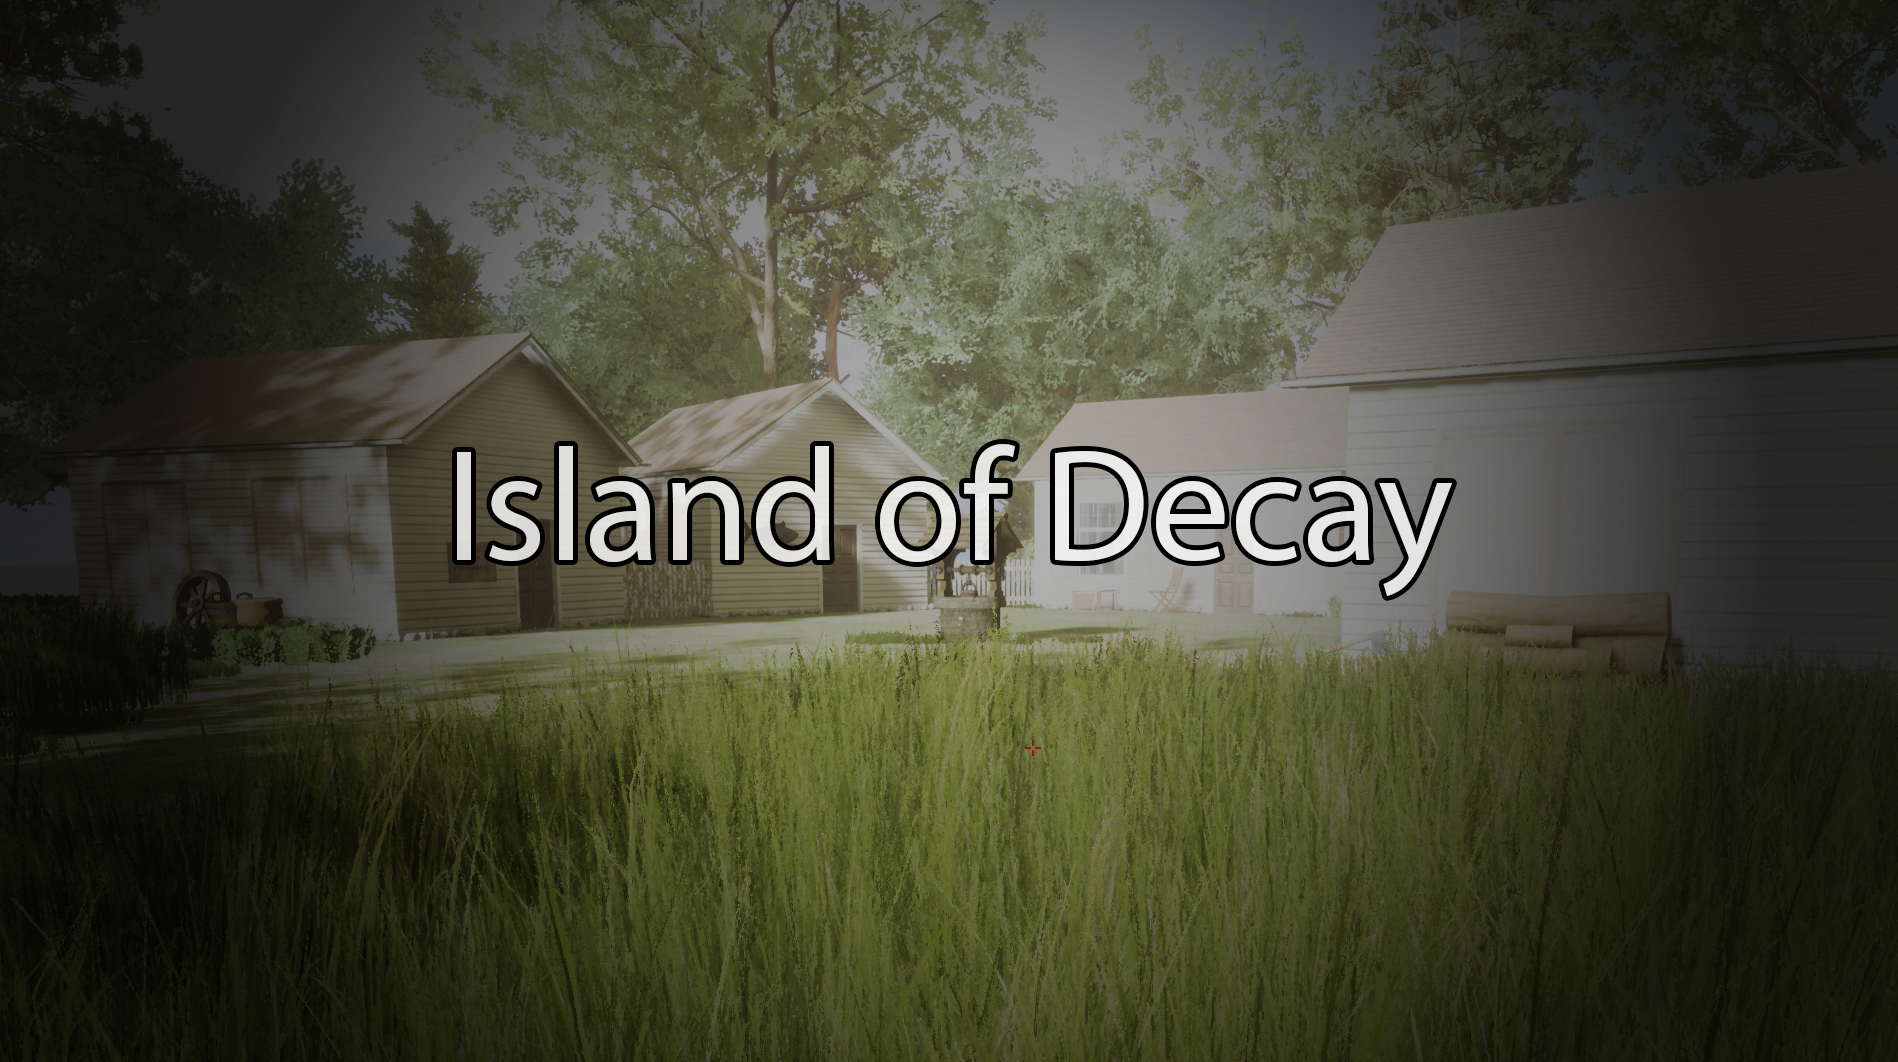 The Island of Decay